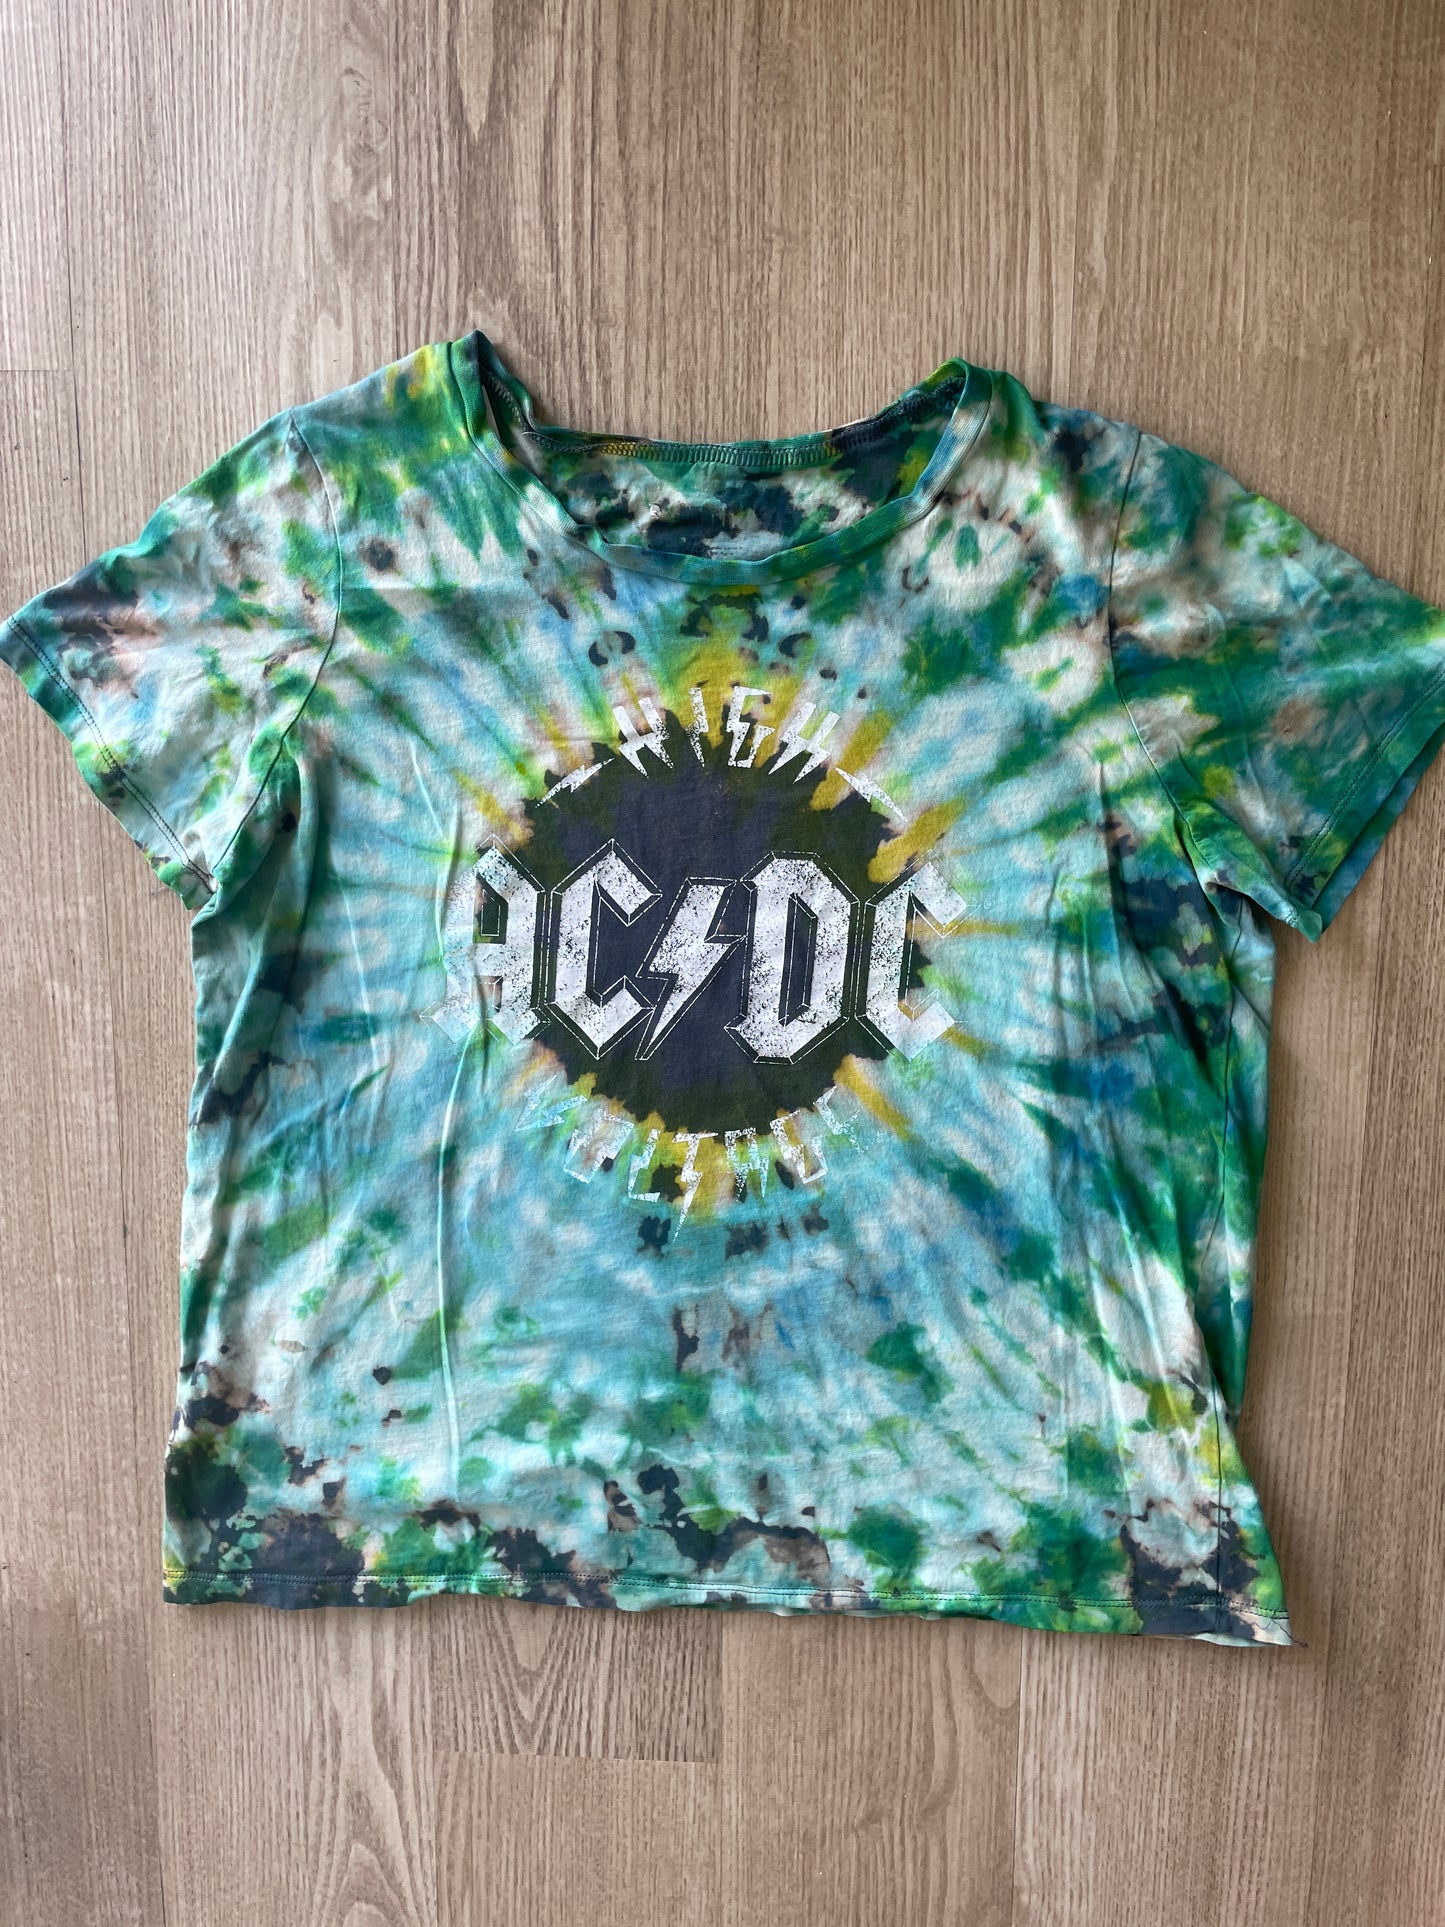 LARGE Women's AC/DC High Voltage Reverse Tie Dye T-Shirt | One-Of-a-Kind Gray, Green, and Blue Short Sleeve